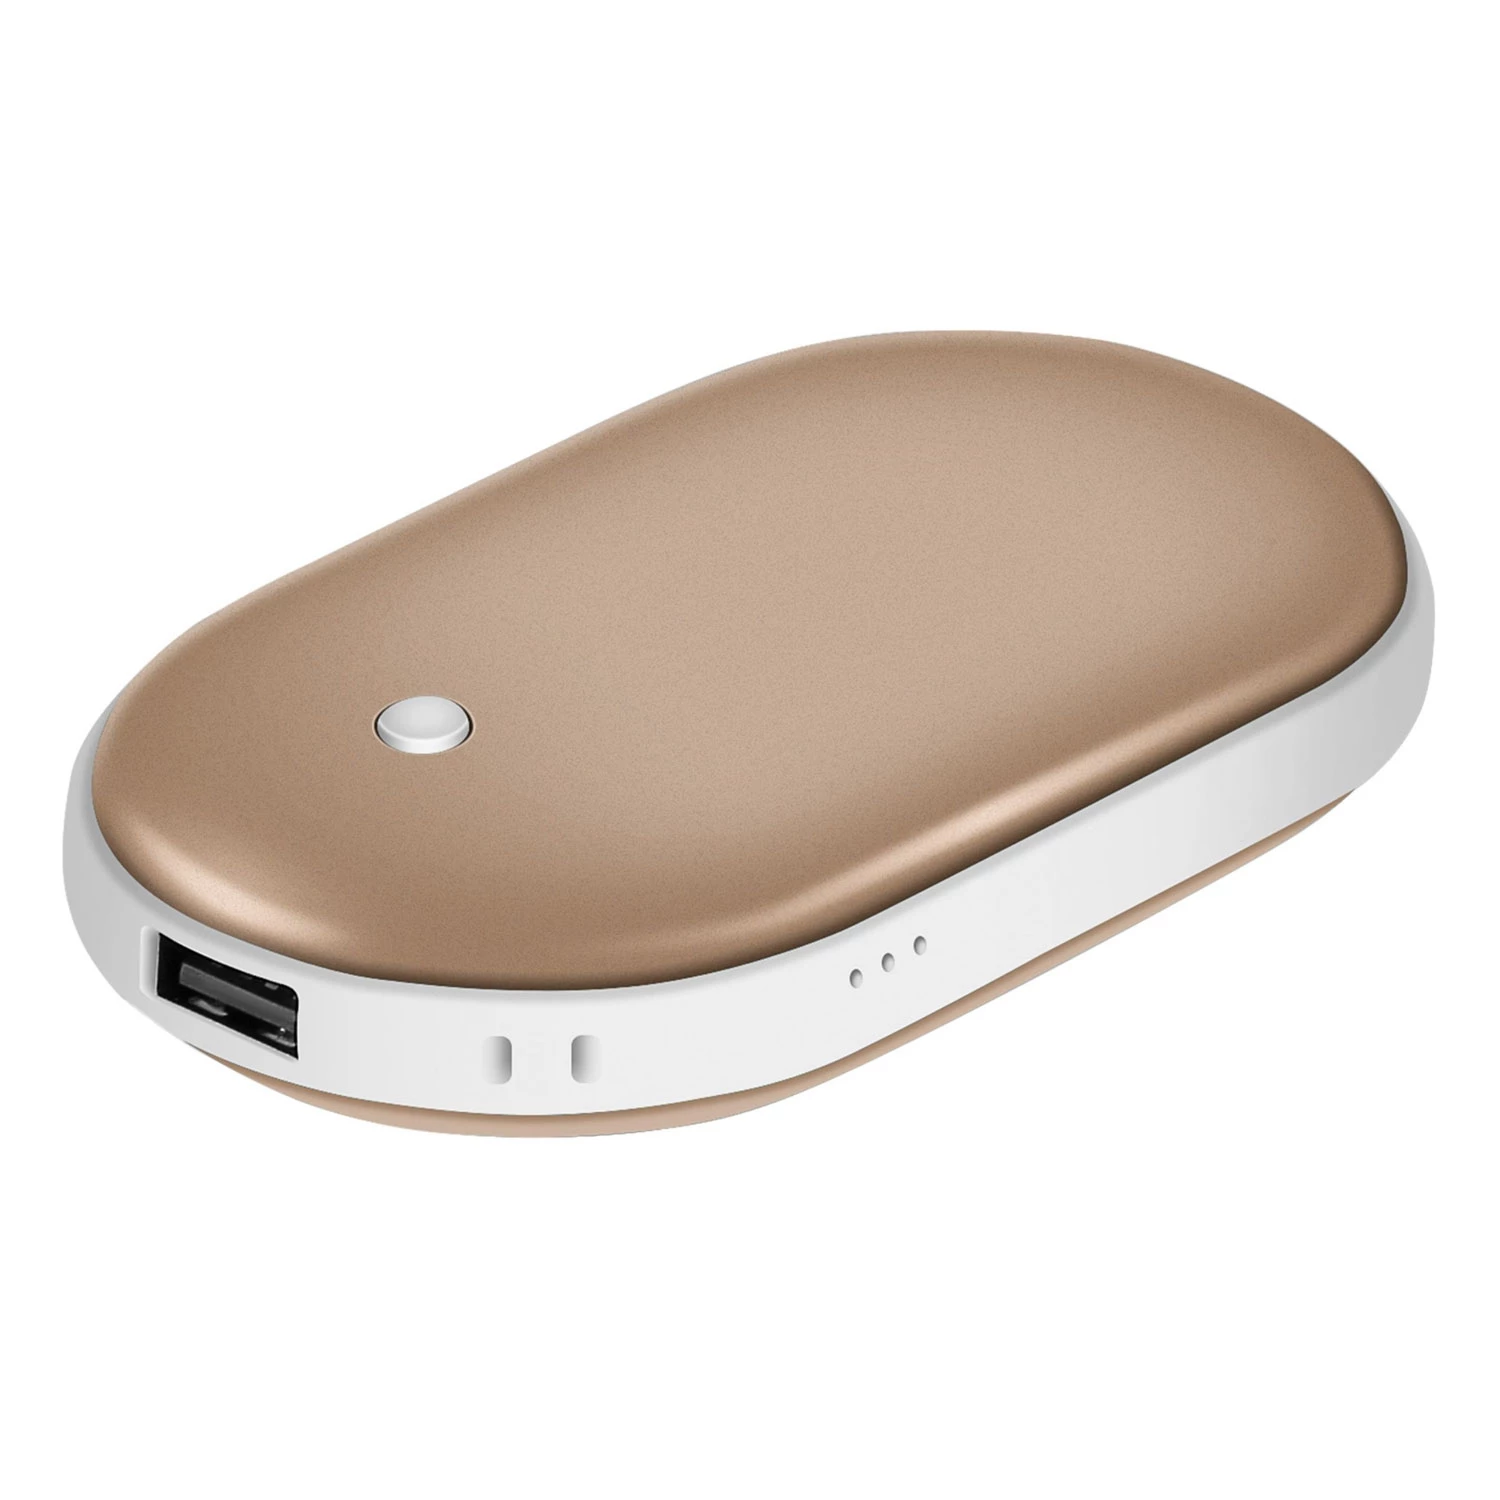 5000mAh Portable Hand Warmer & Power Bank - Rechargeable, Double-Sided Heating